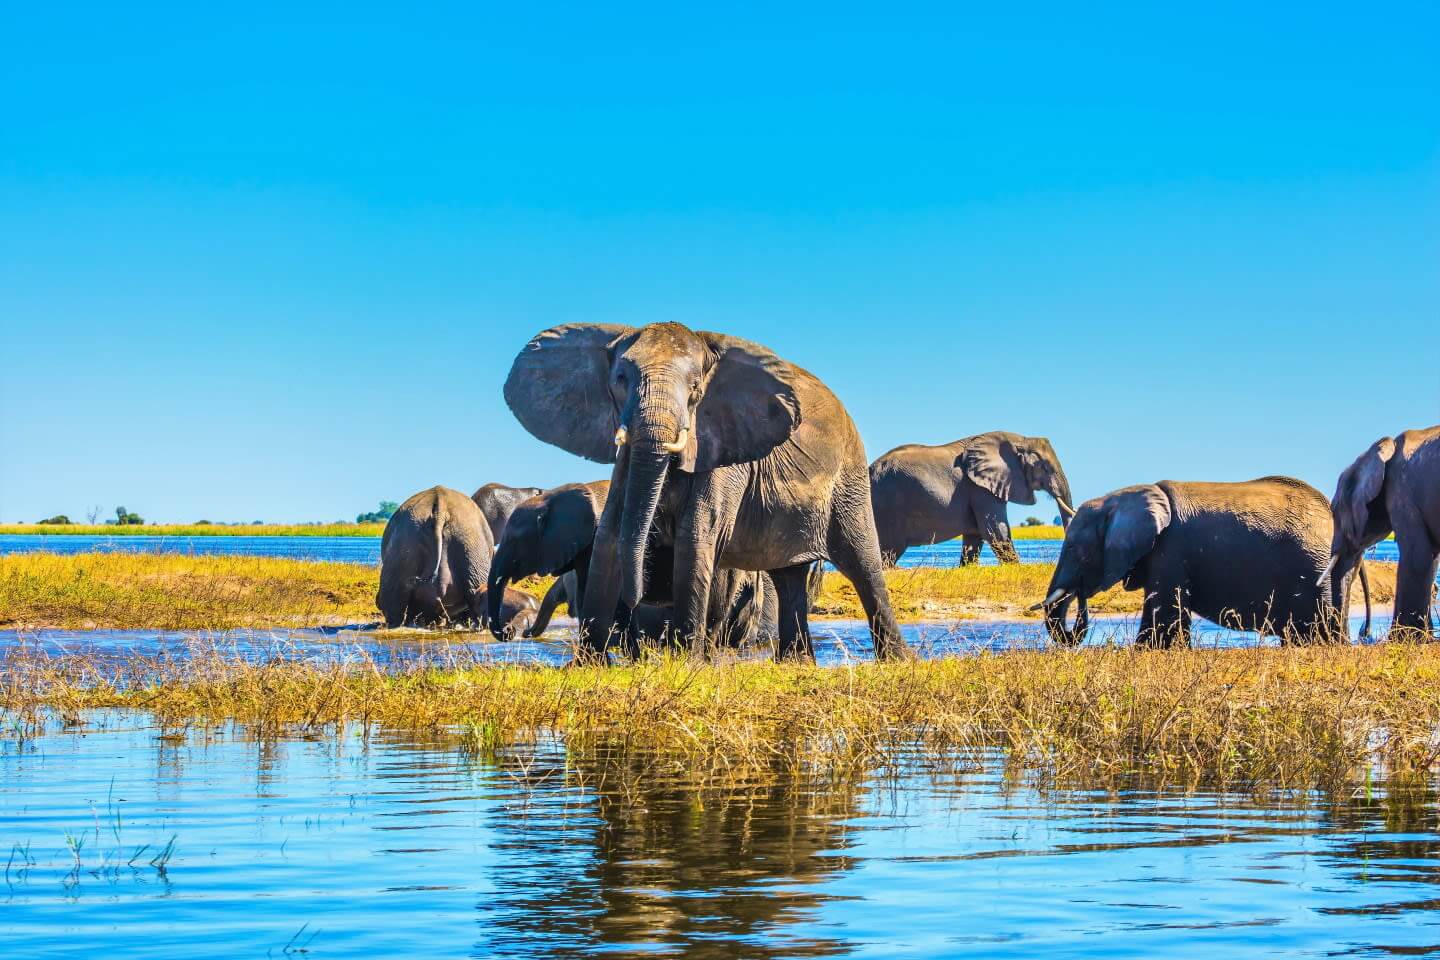 A heard of elephants including adults and cubs at the Okavango Delta